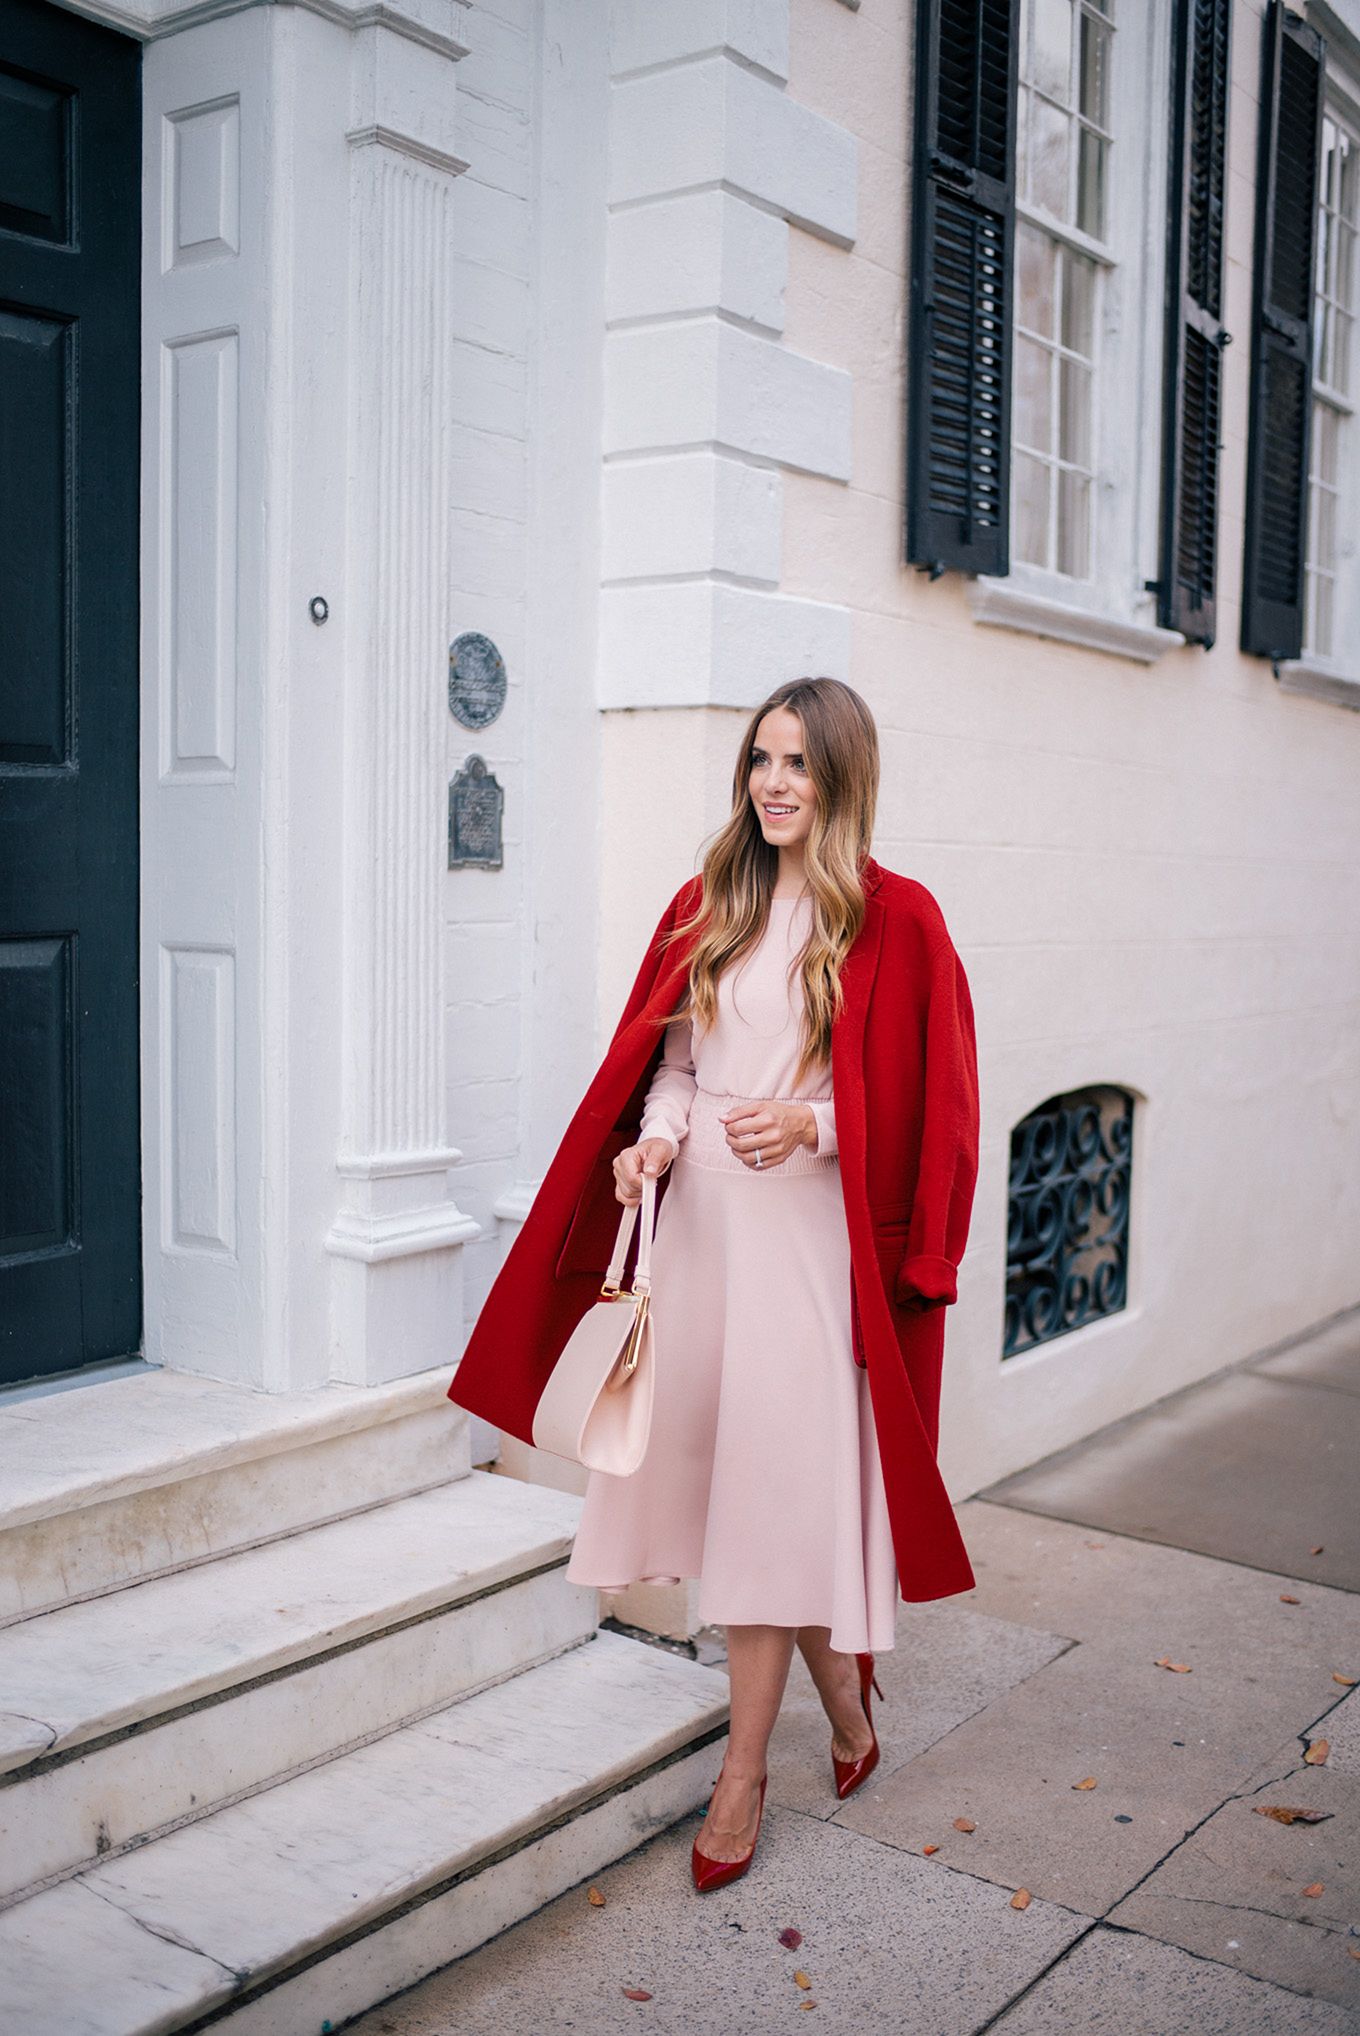 Red pink outfit from juliaberolzheimer